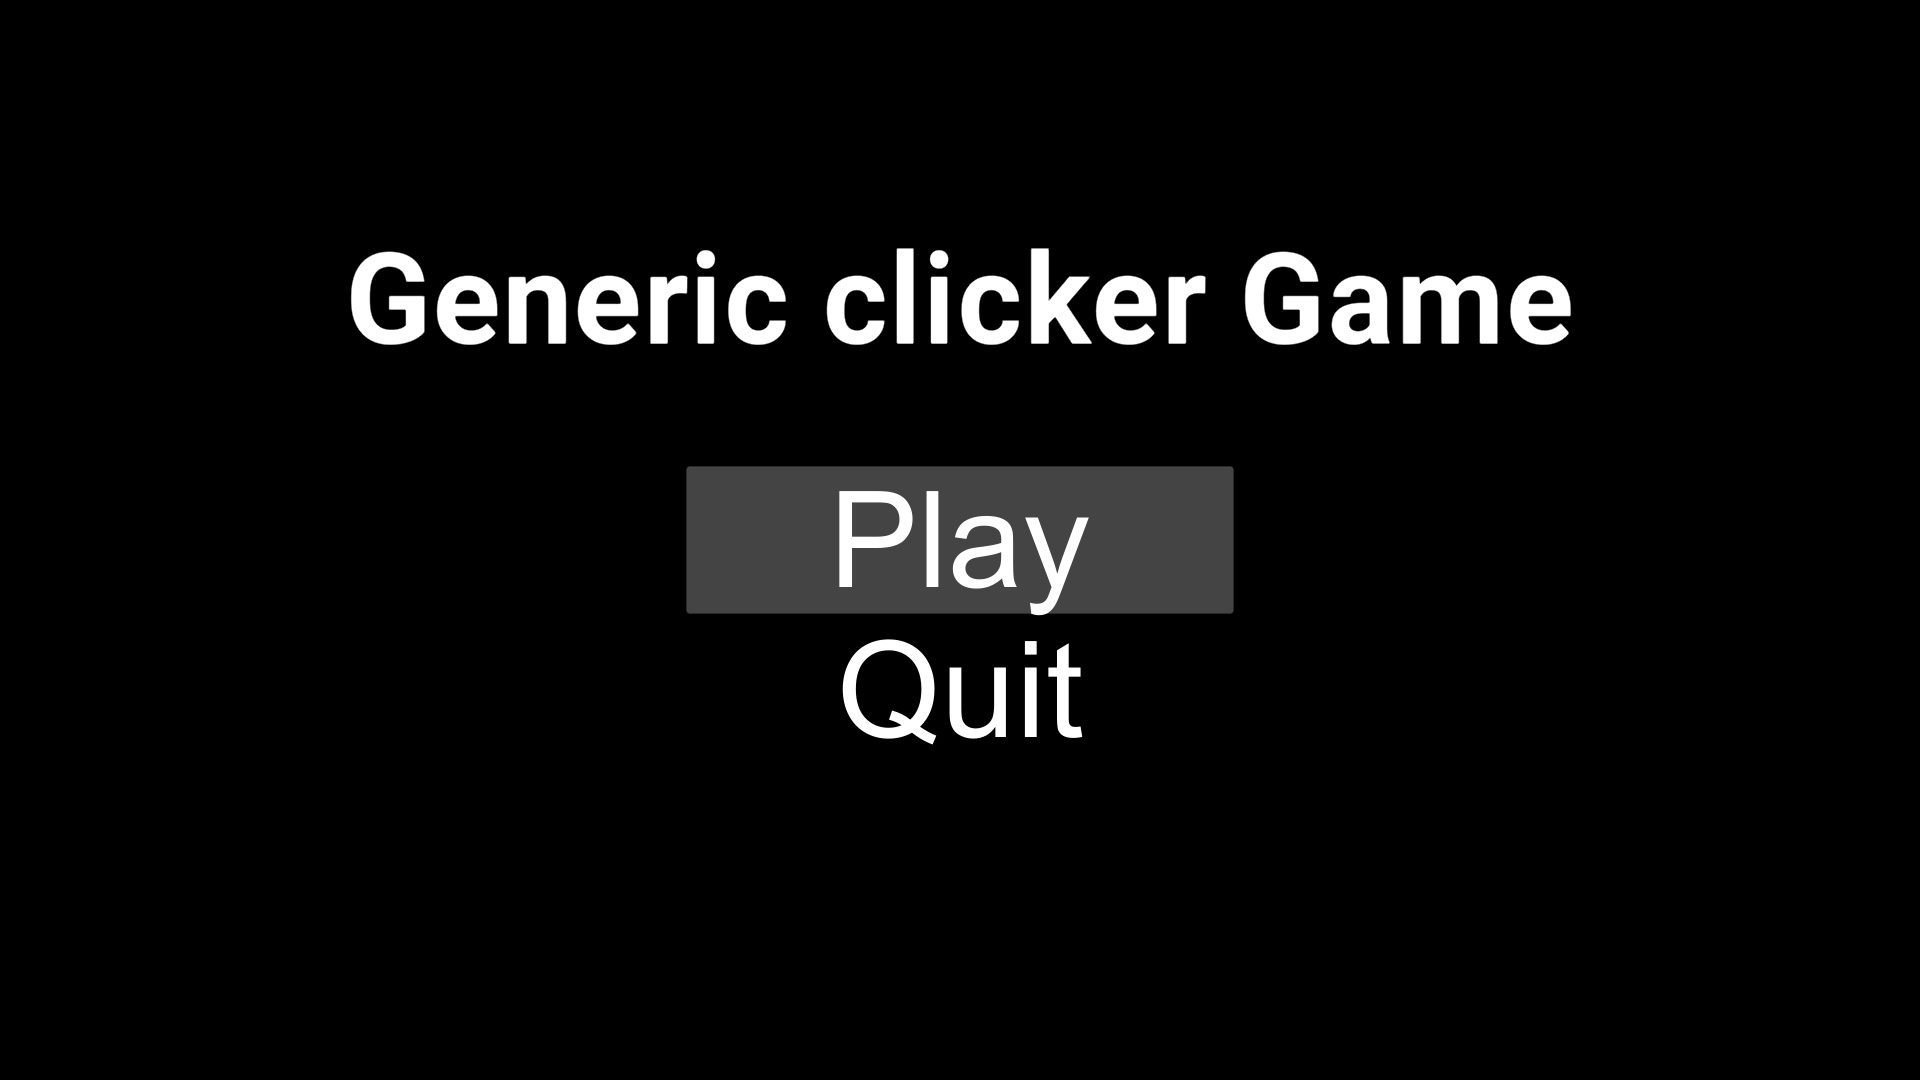 Generic Clicker Game by Emilypartcat